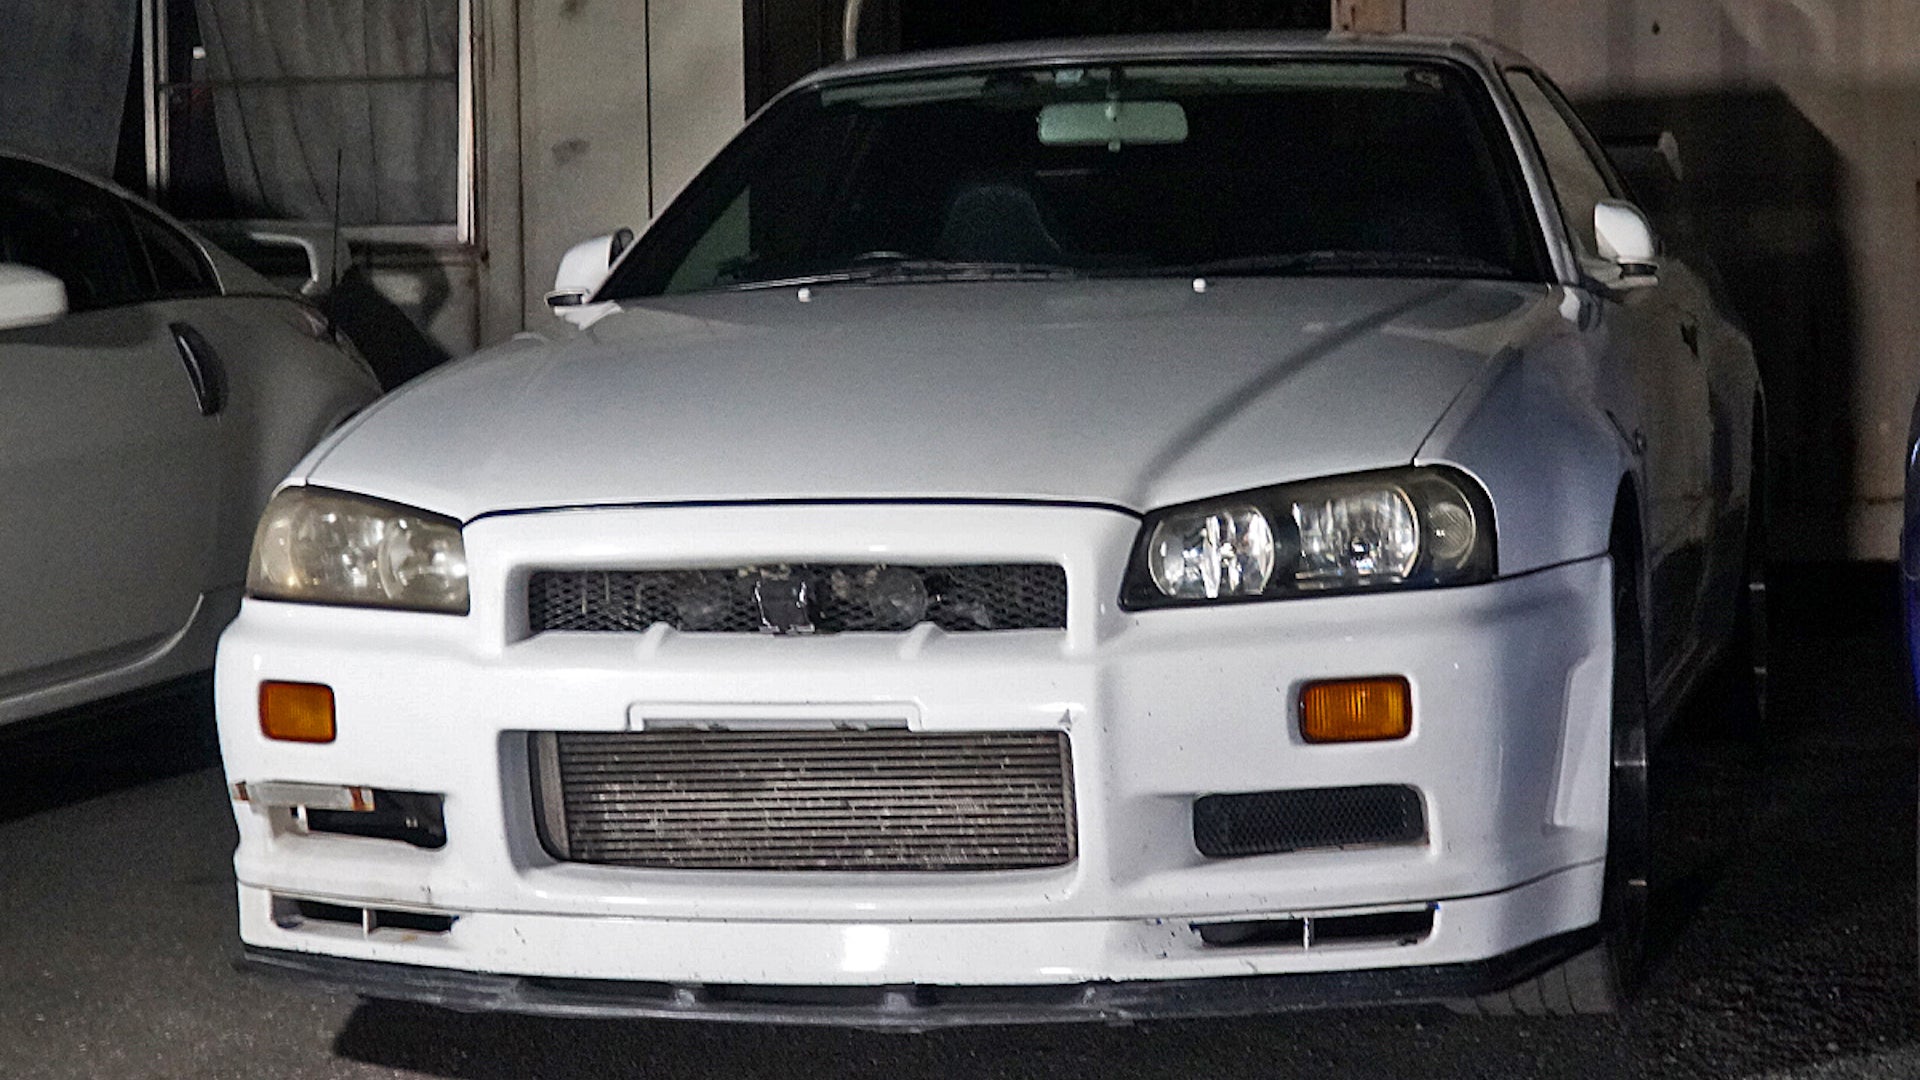 Rescued Nissan Skyline GT-R R34 retrieved just in time from a shipping container theft.